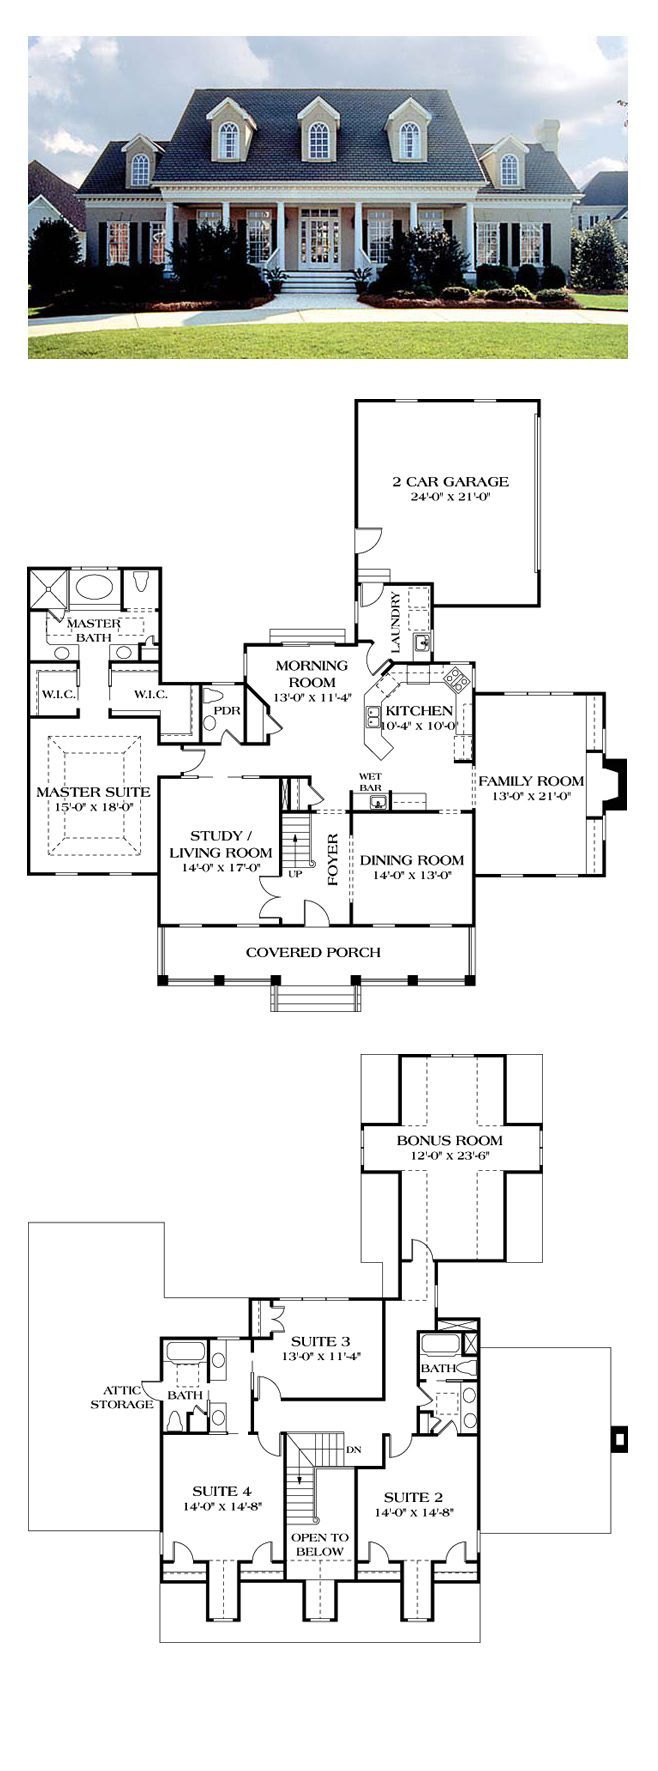 Colonial House Plan 85454 | Total Living Area: 3338 sq. ft., like the family room of to the side